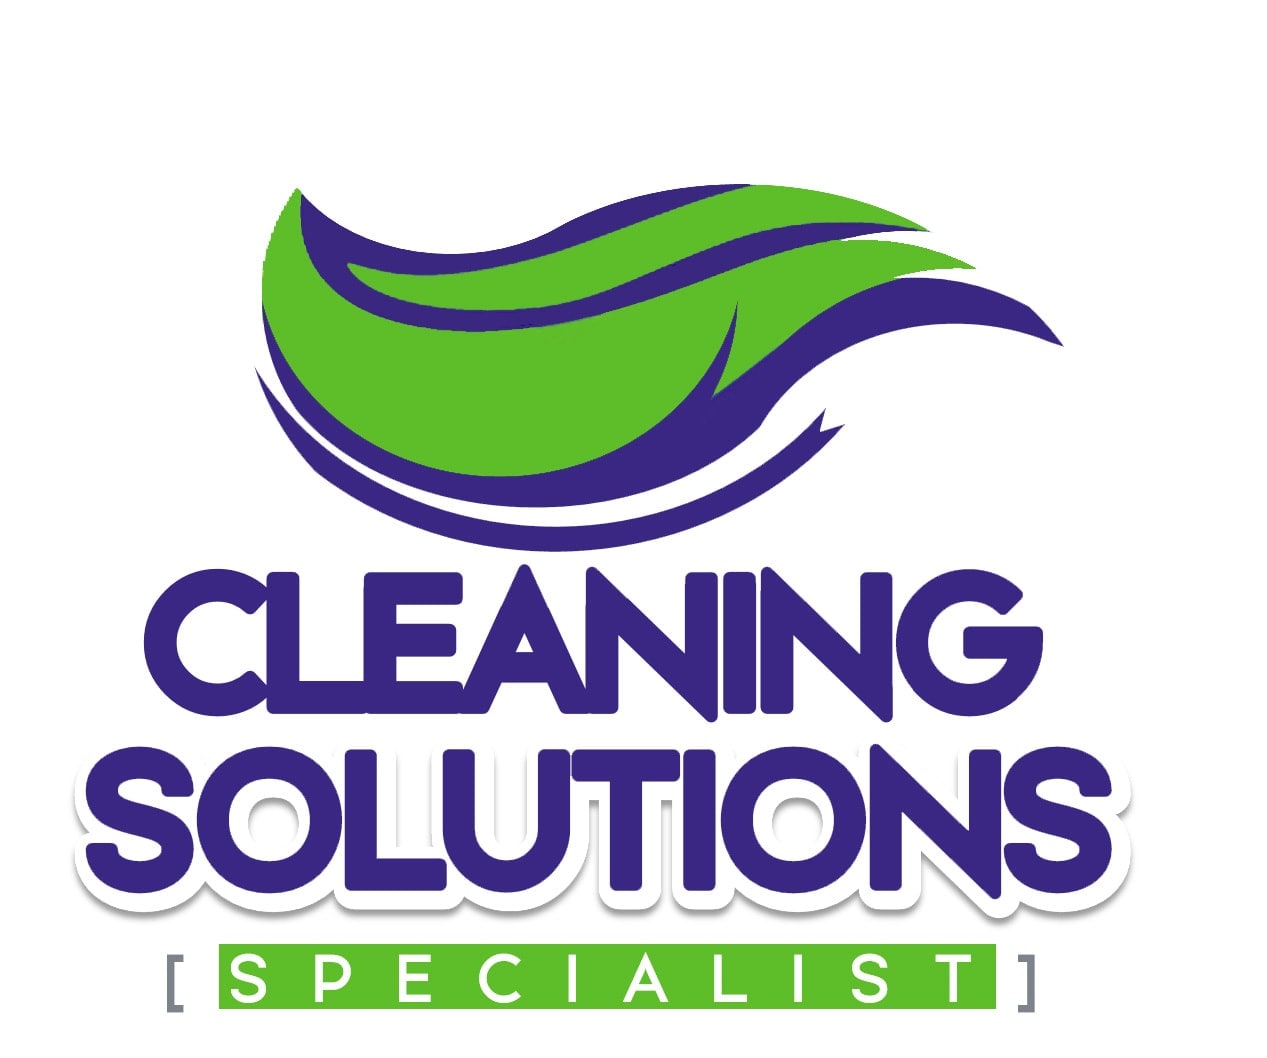 Cleaning Solutions Specialist